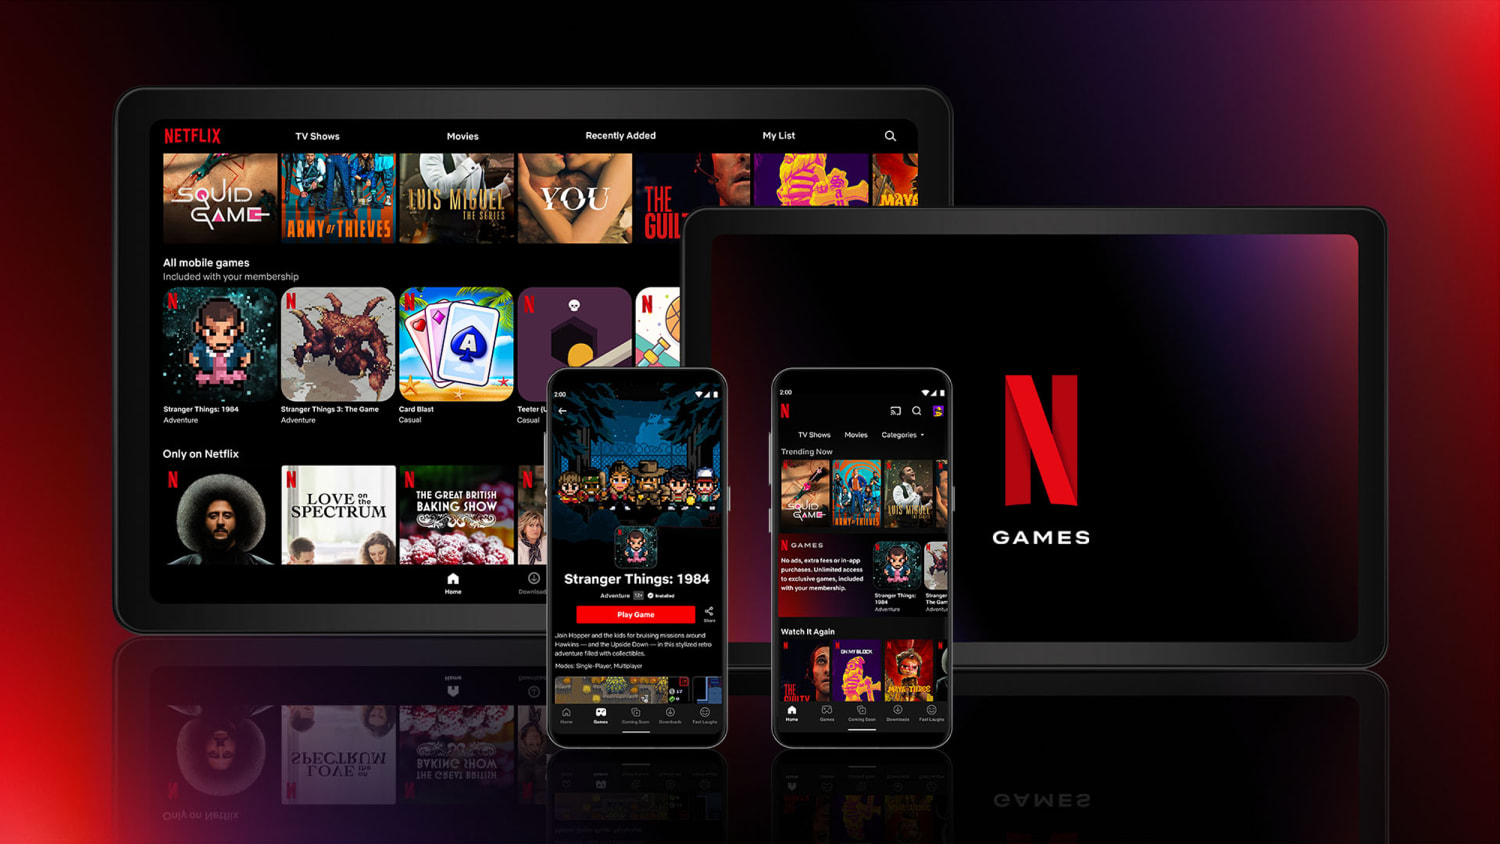 Netflix rolls out its first mobile games